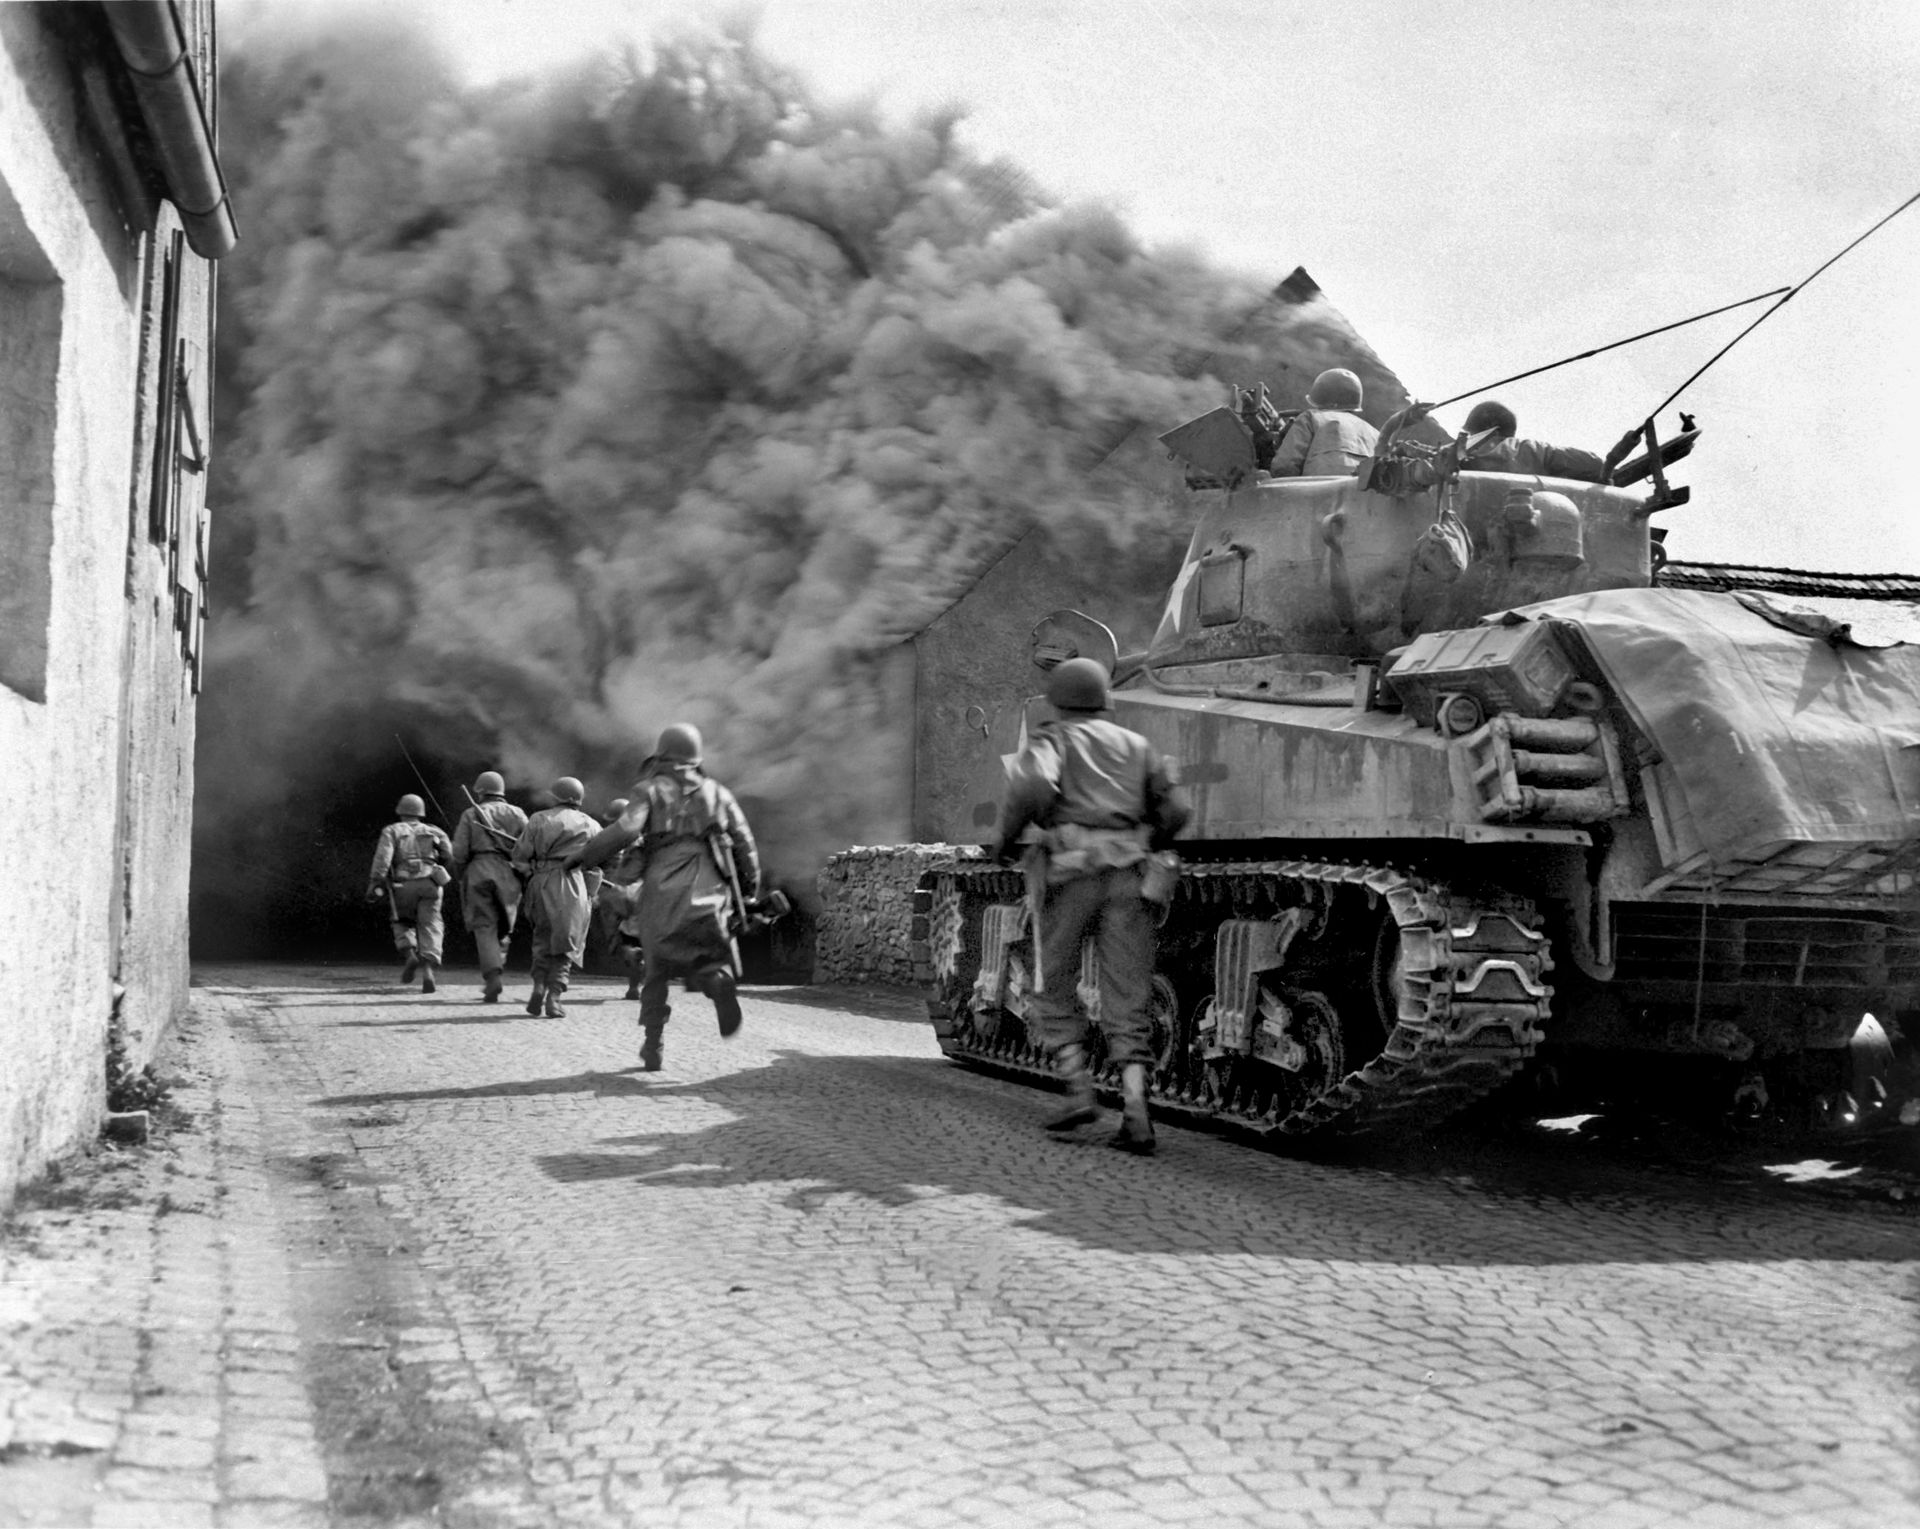 A U.S. tank helps clear enemy troops from a German town. On April 4 the 5th Armored Division crossed the Weser River after waiting for XIII Corps infantry to catch up.